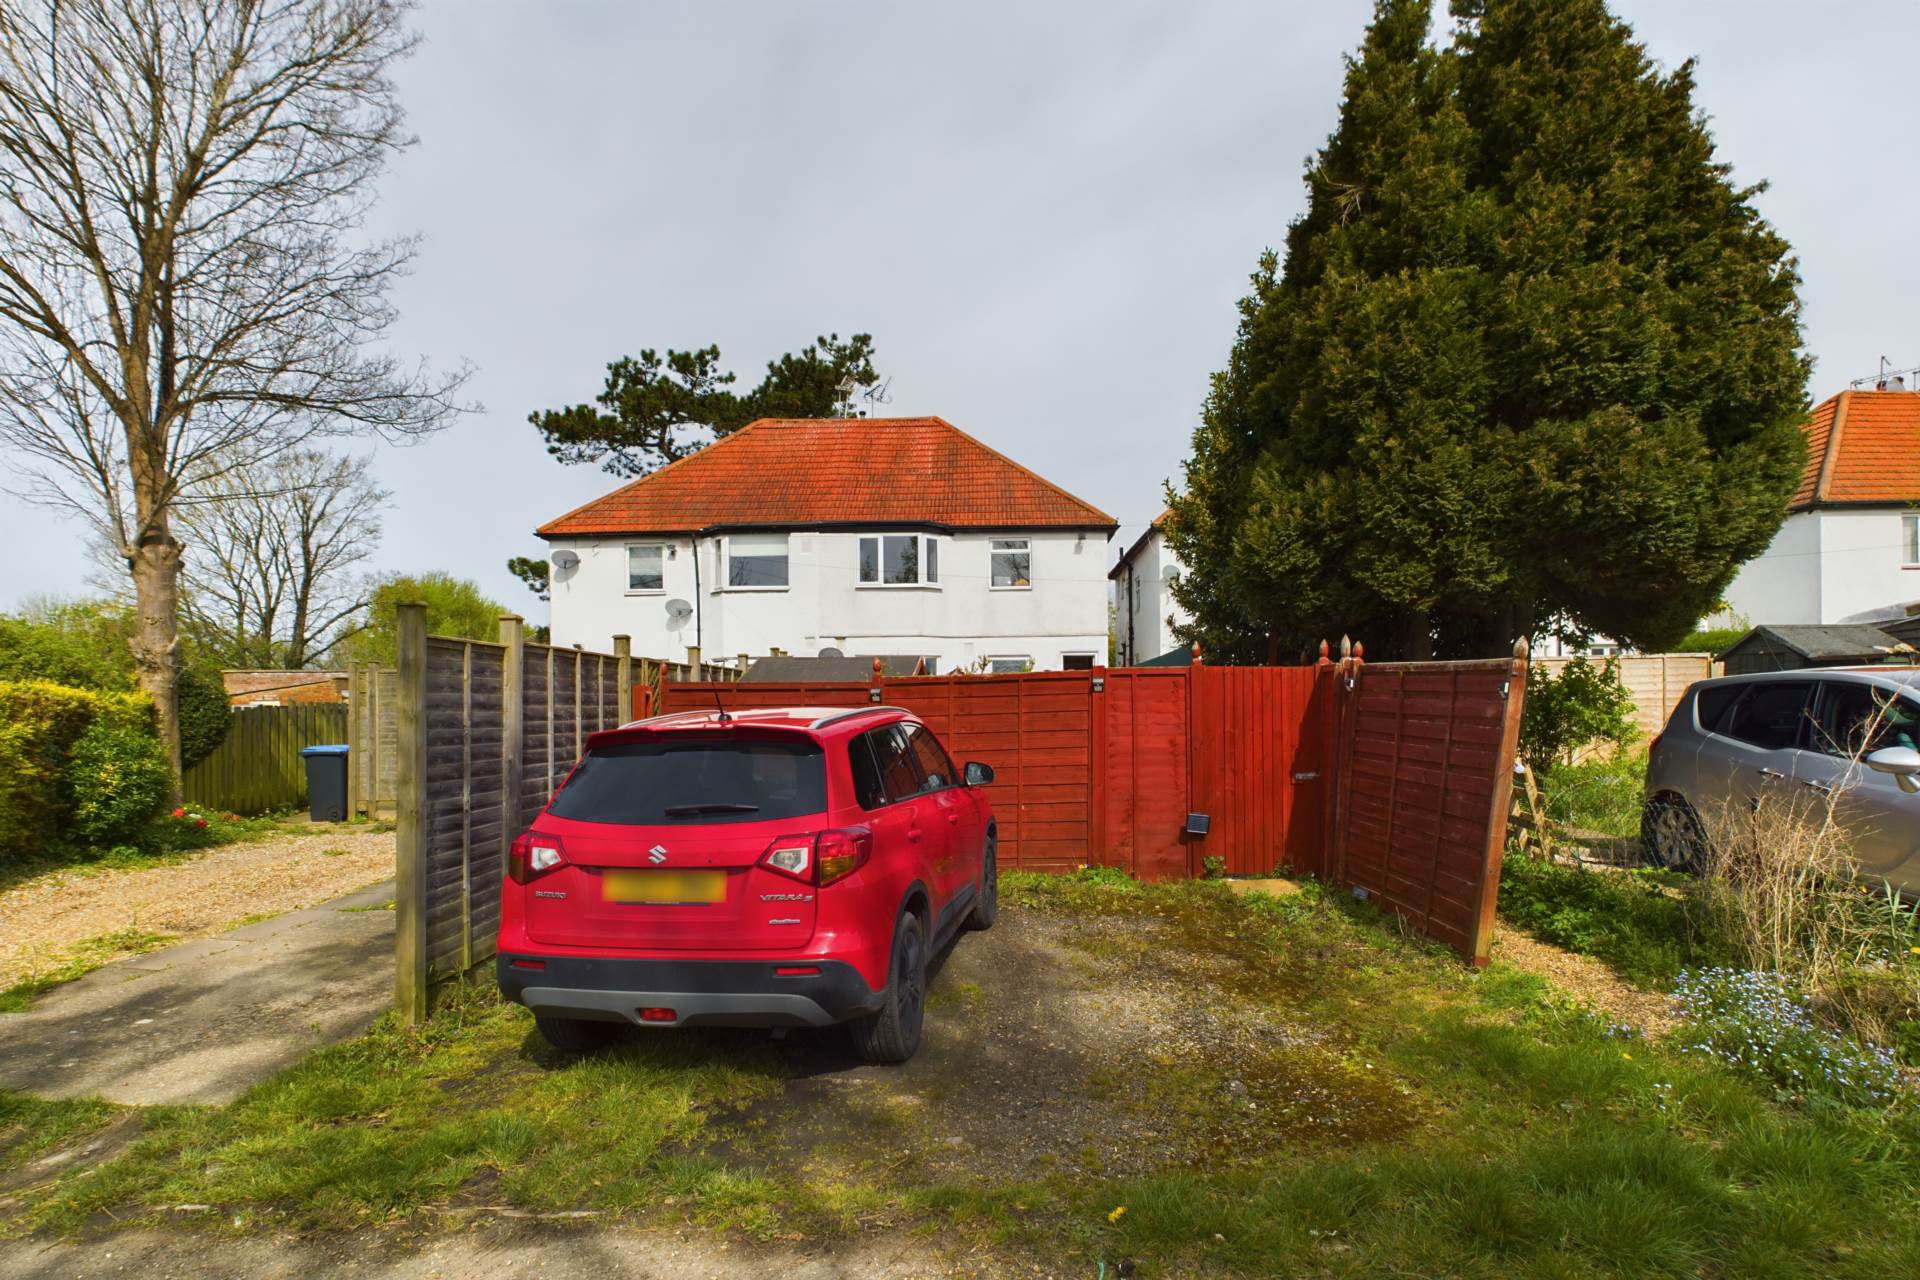 Melsted Road, Boxmoor, Image 14